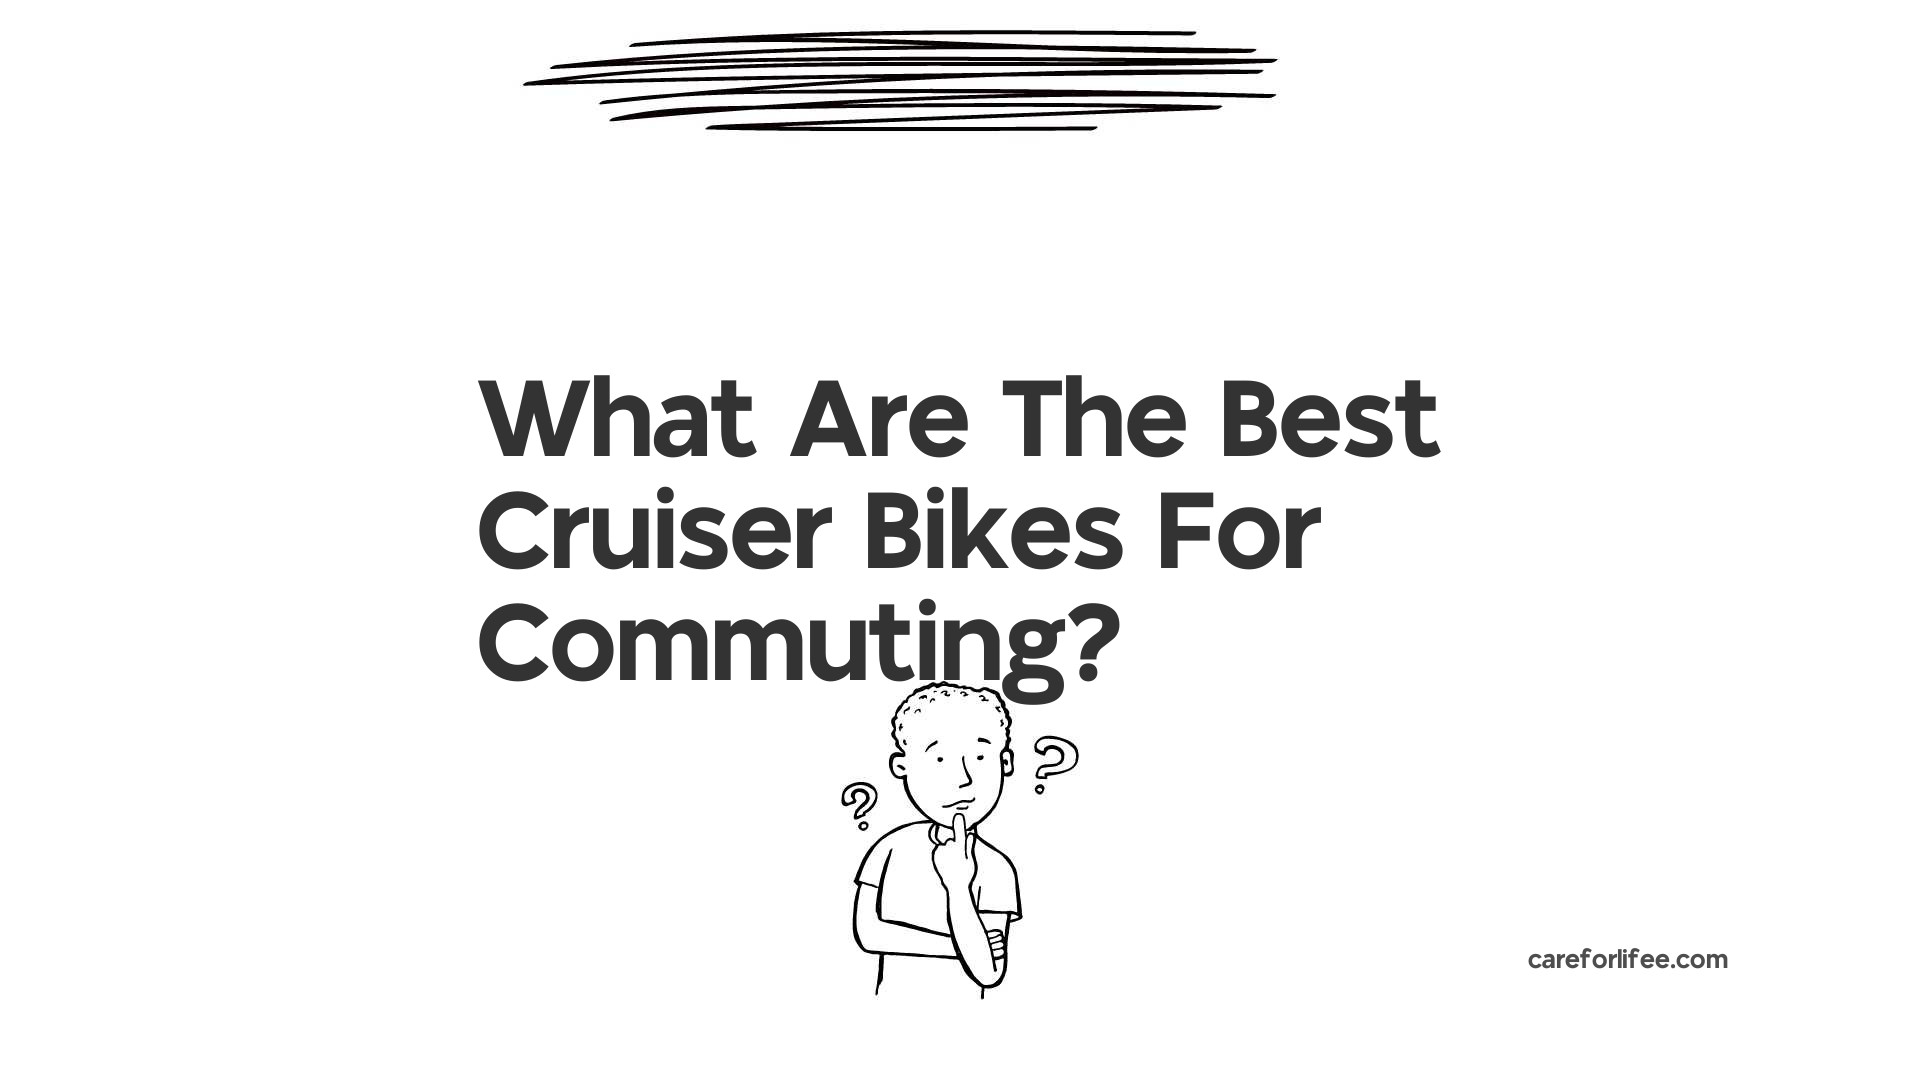 What Are The Best Cruiser Bikes For Commuting?